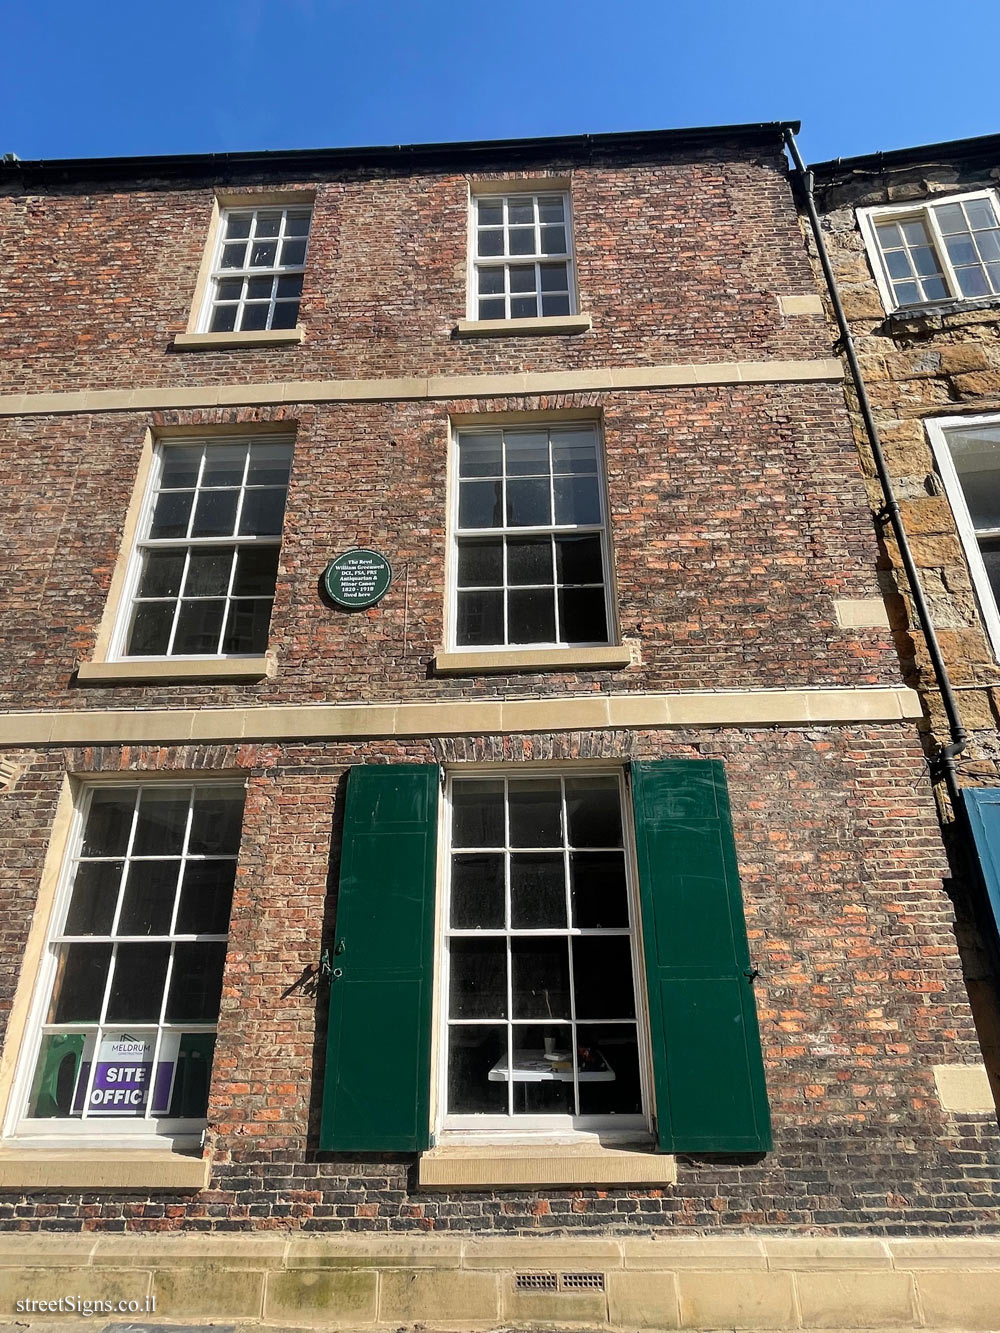 Durham - A memorial plaque where the archaeologist William Greenwell lived - 27 N Bailey, Durham DH1 3EW, UK